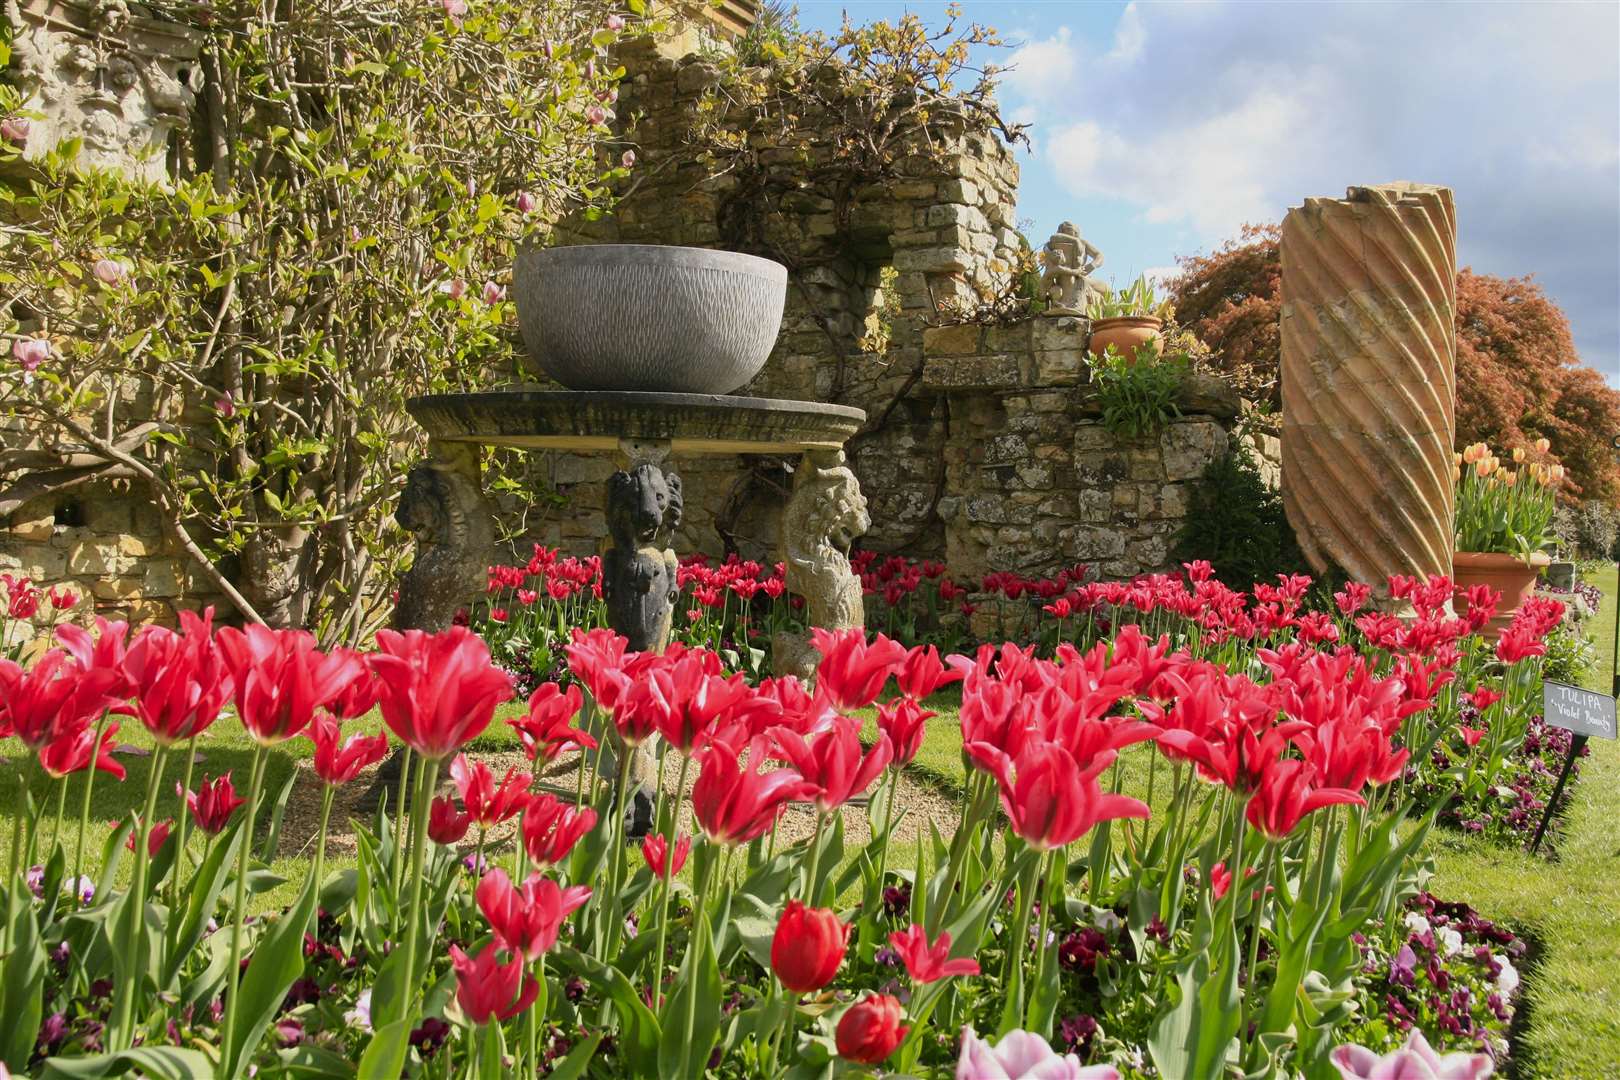 Stroll through the walled garden with an expert guide. Picture: Vikki Rimmer